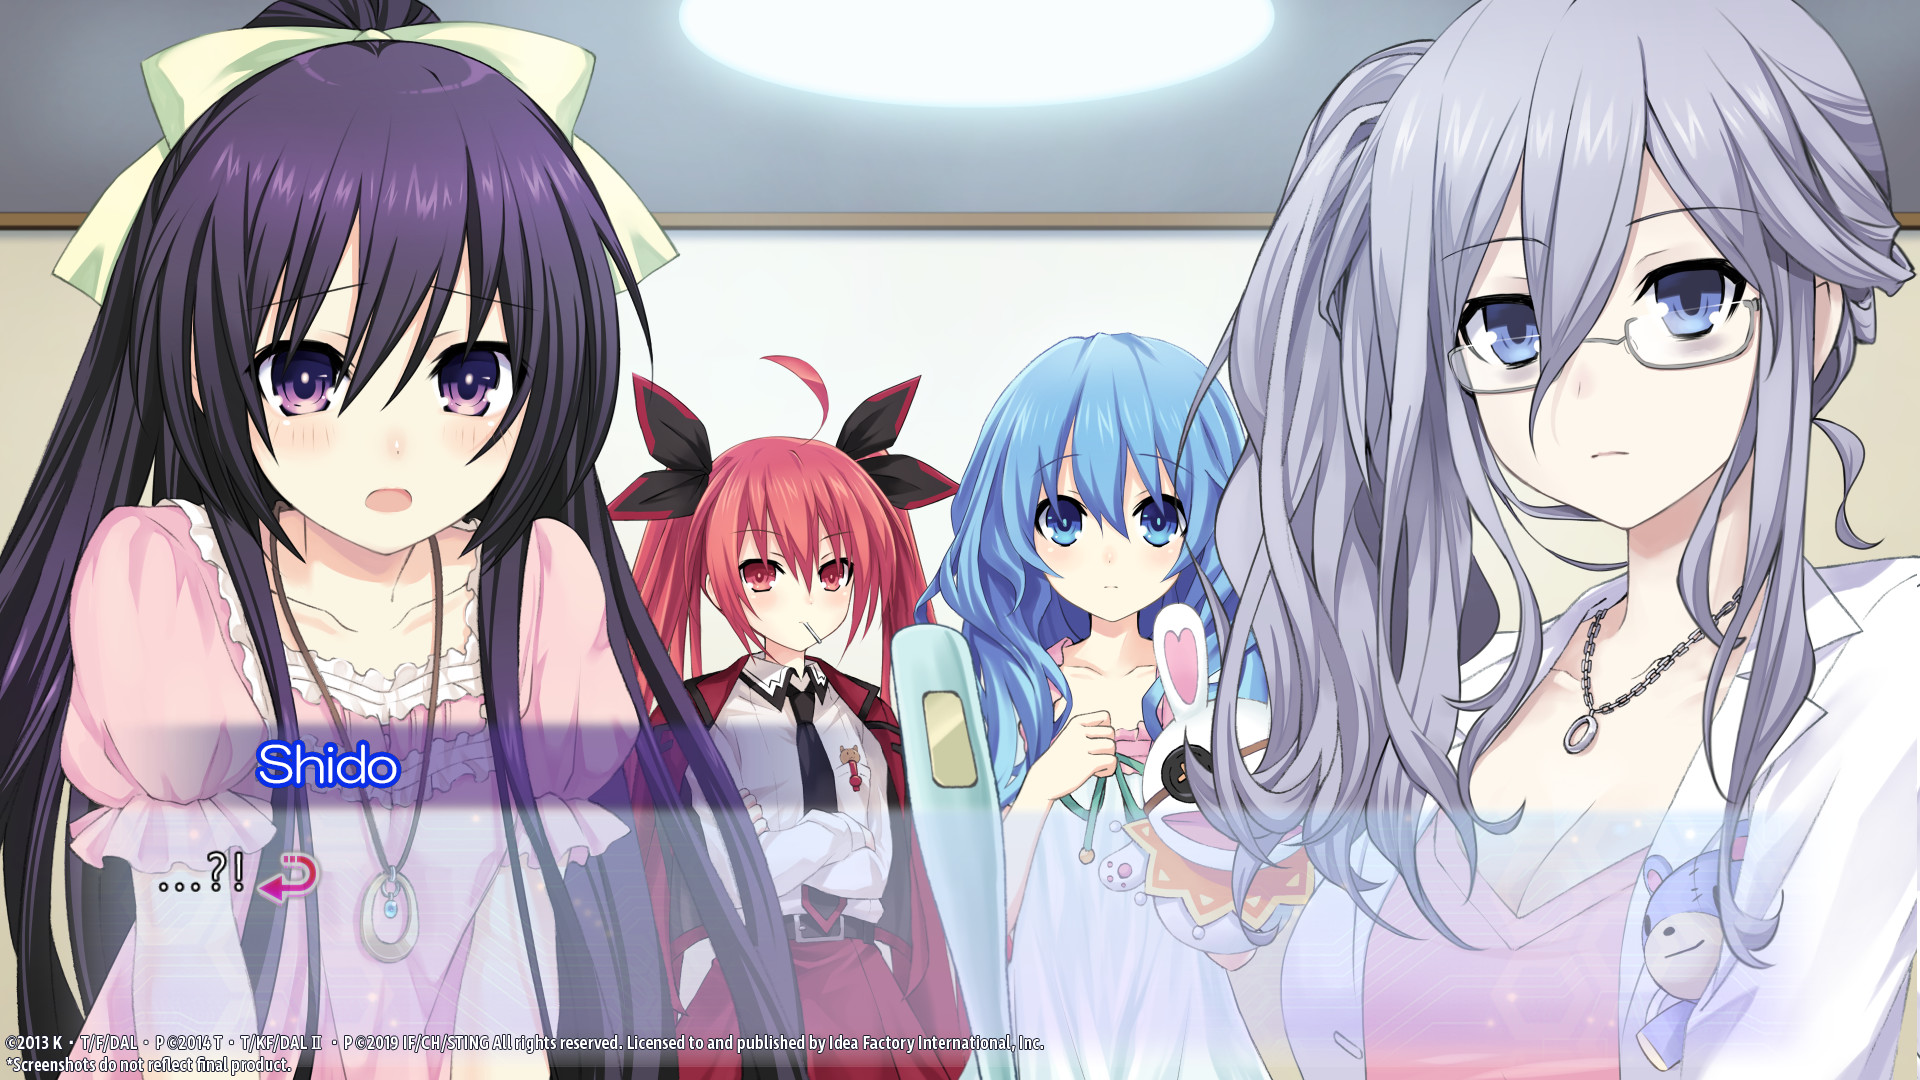 anime, Compile Heart, DATE A LIVE: Rio Reincarnation, DATE A LIVE: Rio Reincarnation Review, Idea Factory, PS4, PS4 Review, Sexual Content, simulation, Sting, Visual Novel